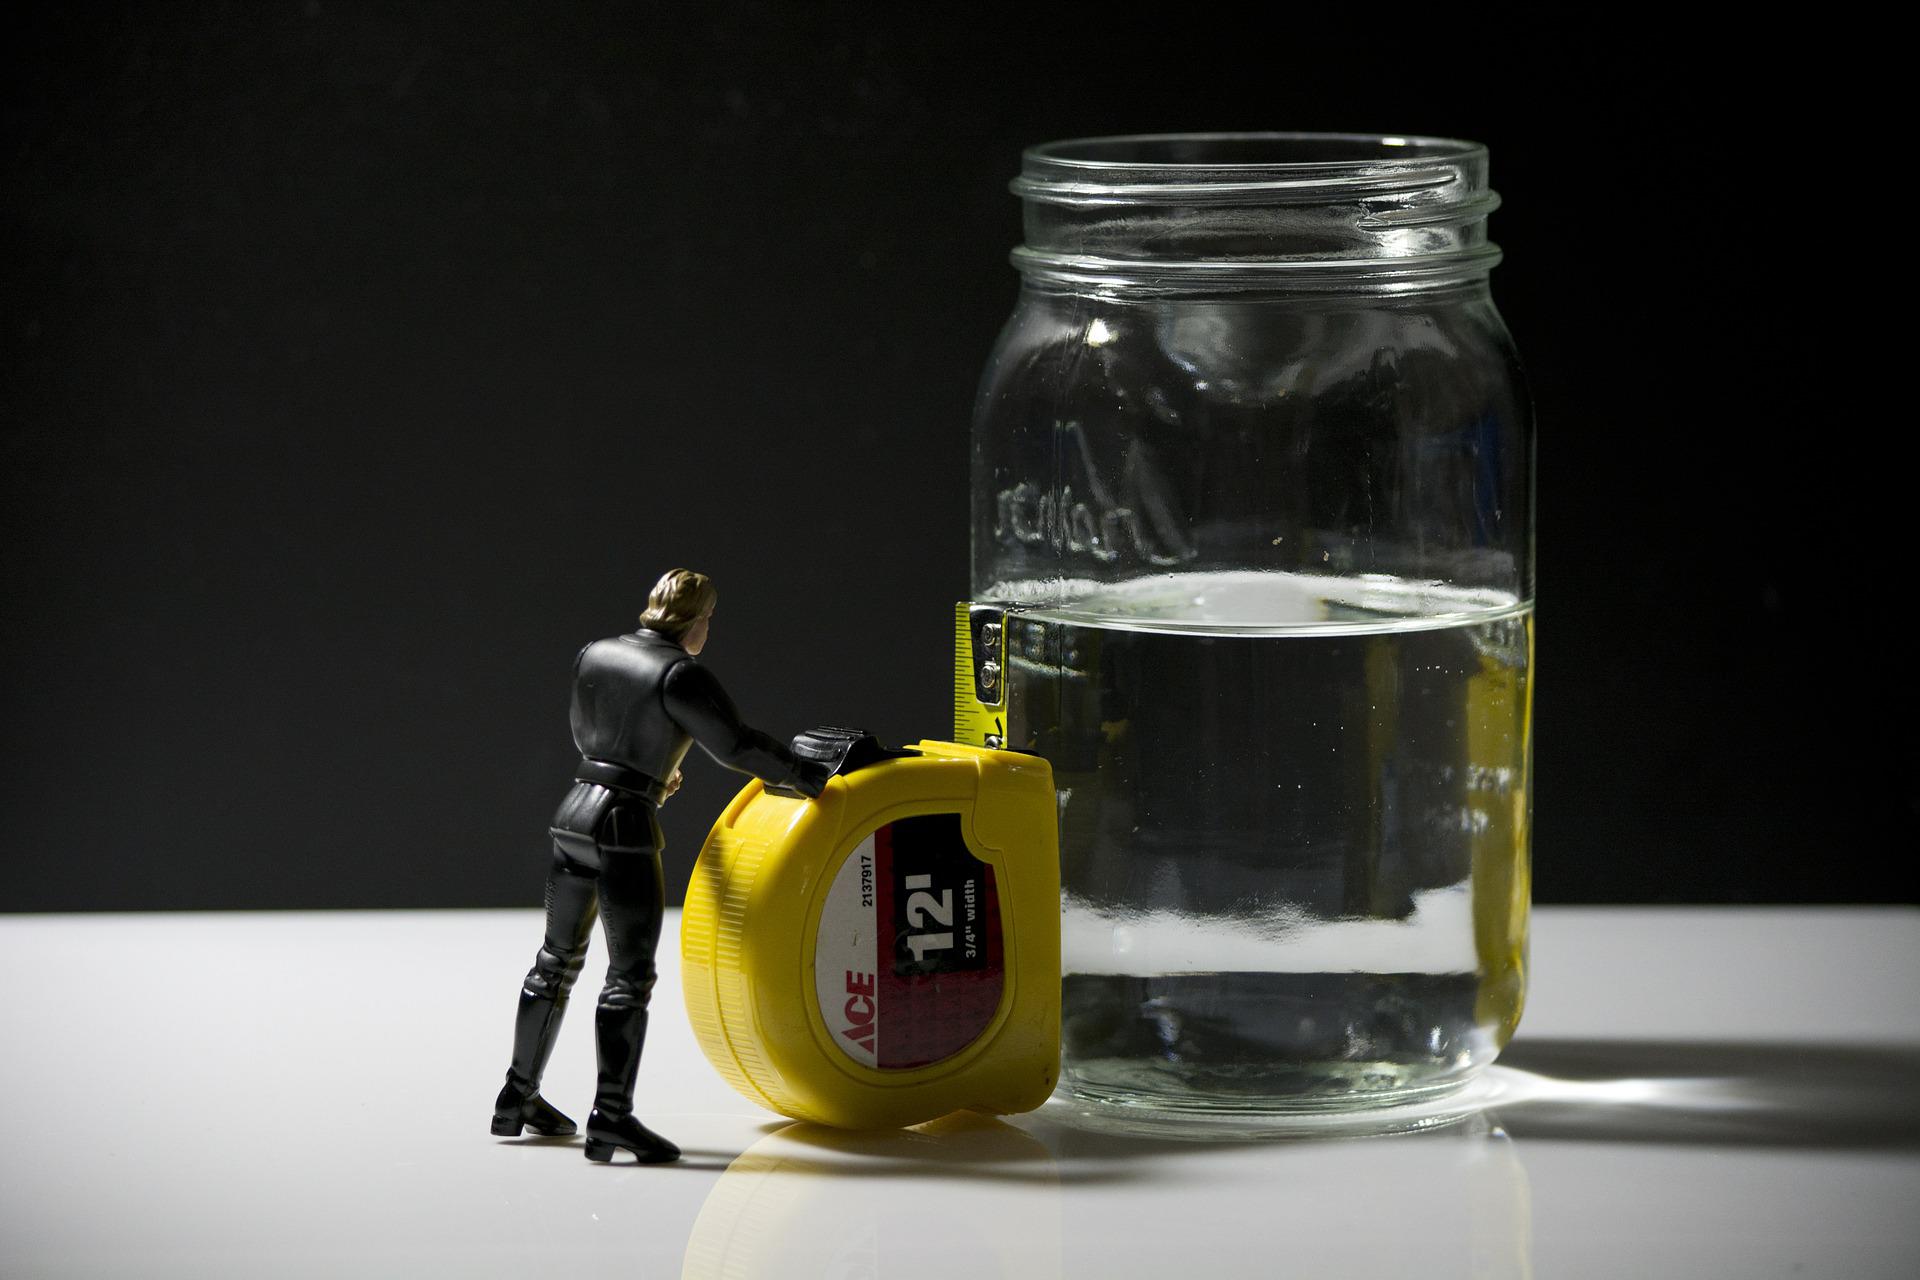 Toy man measuring water level in glass with tape measure - is it half full or half empty?